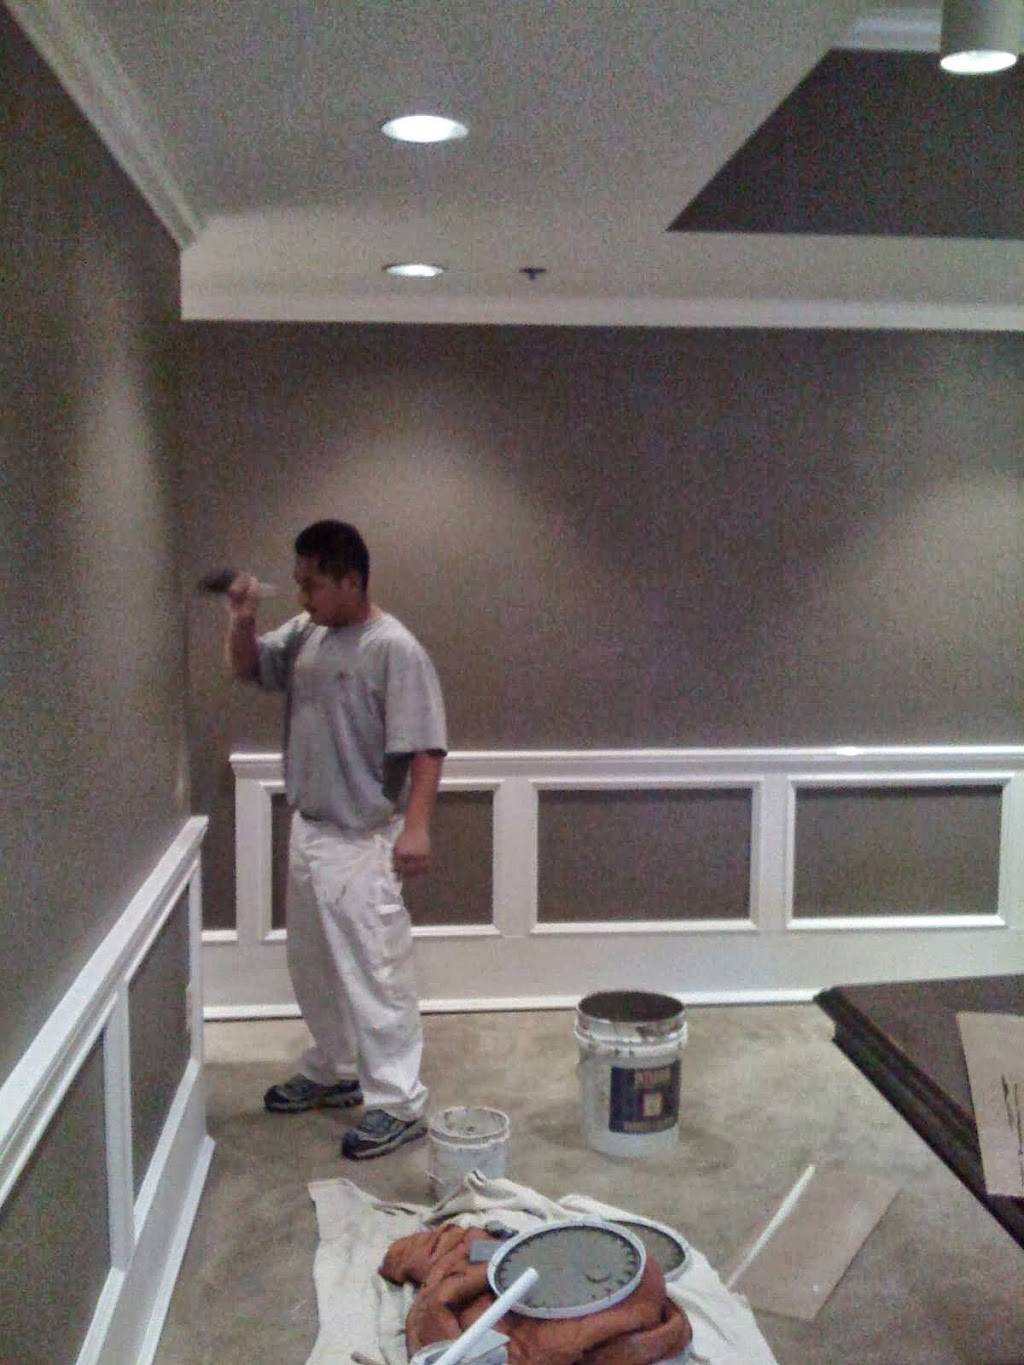 C Fisher Painting & Home Repair | 6196 Frances Wood Dr, Bartlett, TN 38135, USA | Phone: (901) 335-9163